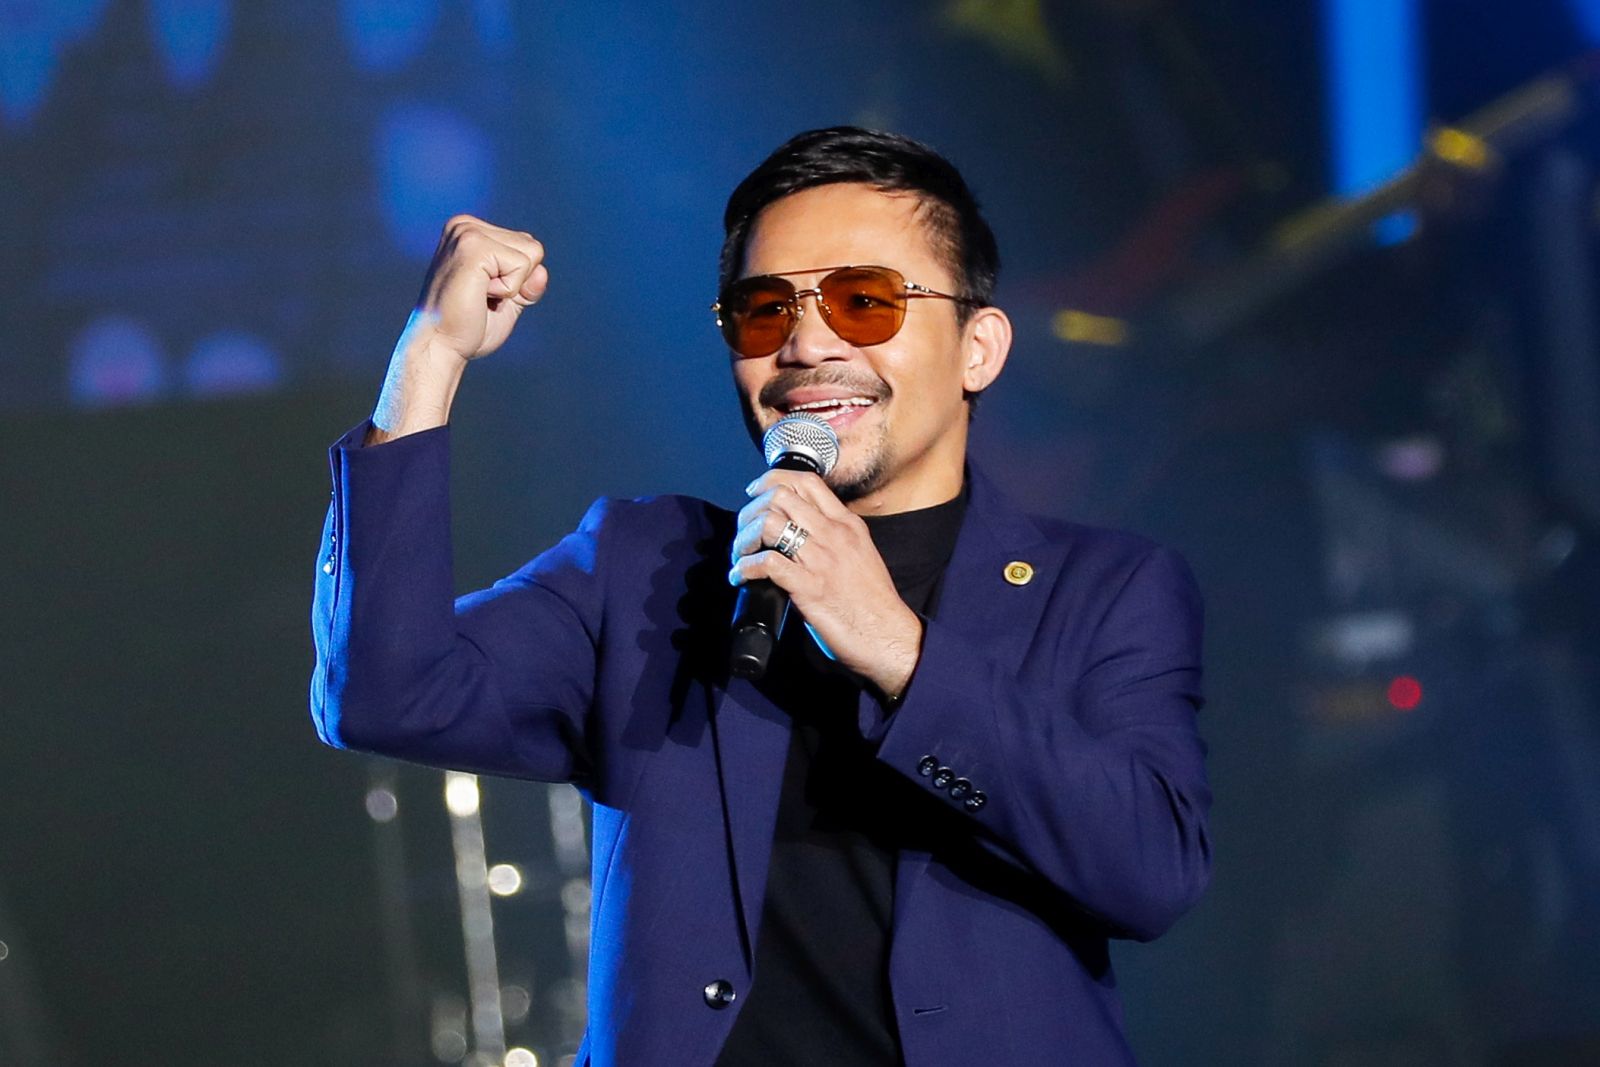 epa09475975 (FILE) - Filipino boxing champion and senator Manny Pacquiao performs during the launch of his own crypto currency in Manila, Philippines 01 September 2019 (reissued 19 September 2021). Pacquiao accepted the nomination of his PDP-Laban party to run for president in 2022, as he said on 19 September 2021.  EPA/MARK R. CRISTINO *** Local Caption *** 55435064